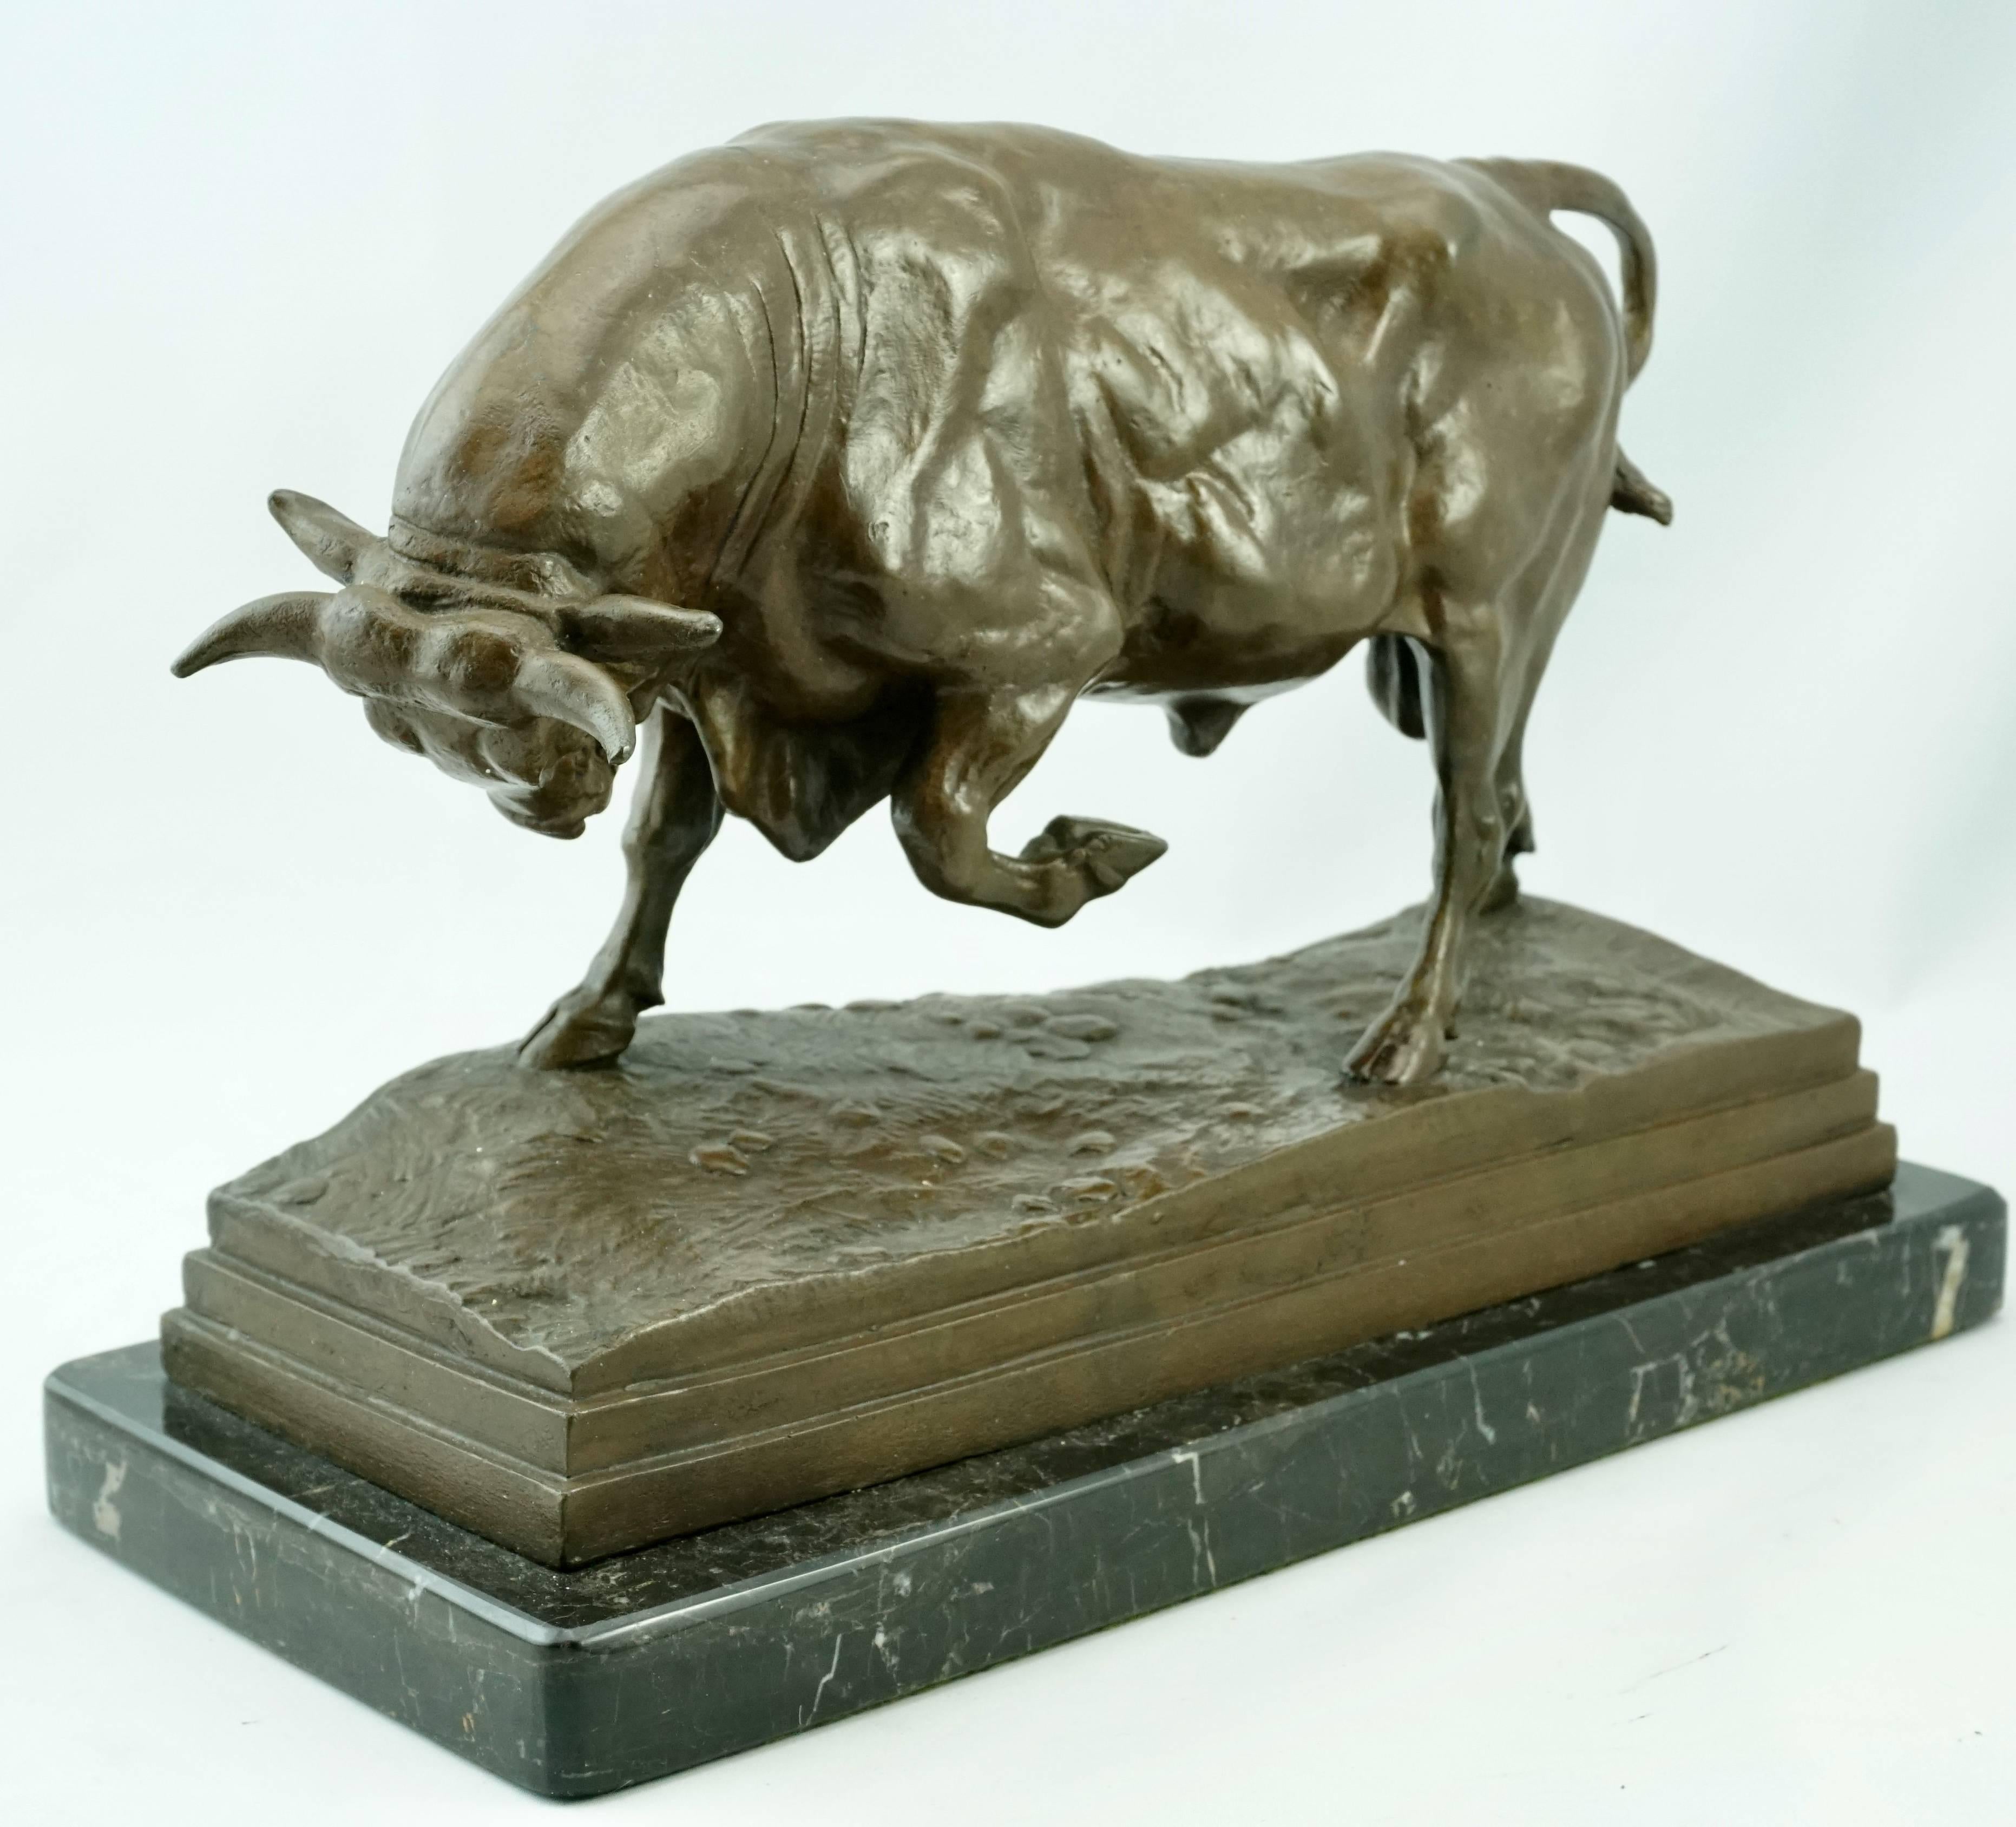 Antoine Louis Barye (French 1796-1875) bronze bull by F Barbedienne Fondeur, circa 1876. “An excellent character study of this powerful species” Rich chocolate brown patina mounted on period marble black and white veined plinth. Rare model!

Bull